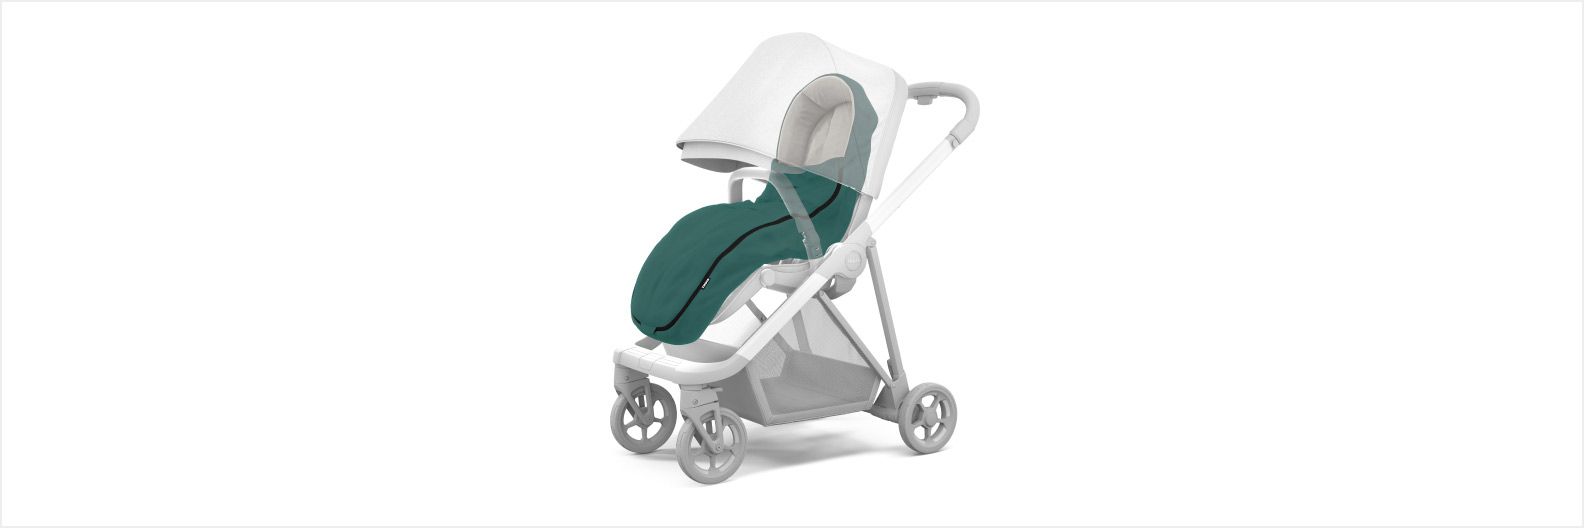 A 3D rendition of the Thule Shine stroller and the Thule Stroller Footmuff with a white background.